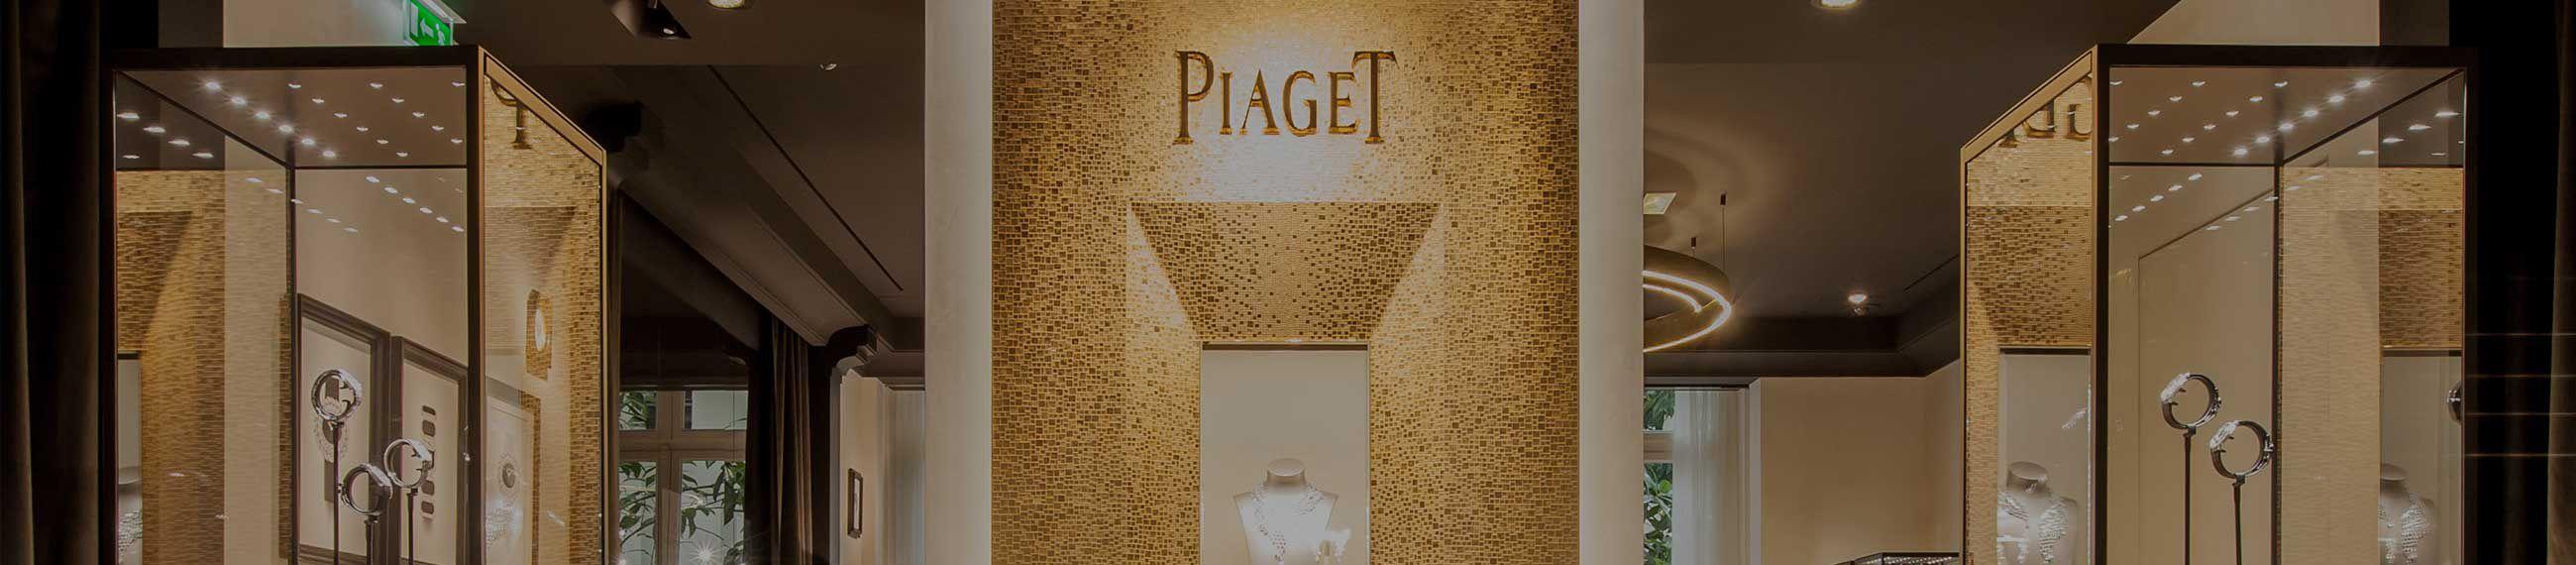 Piaget Logo - Piaget Boutiques in Santa Clara - Luxury Watches & Jewelry Online